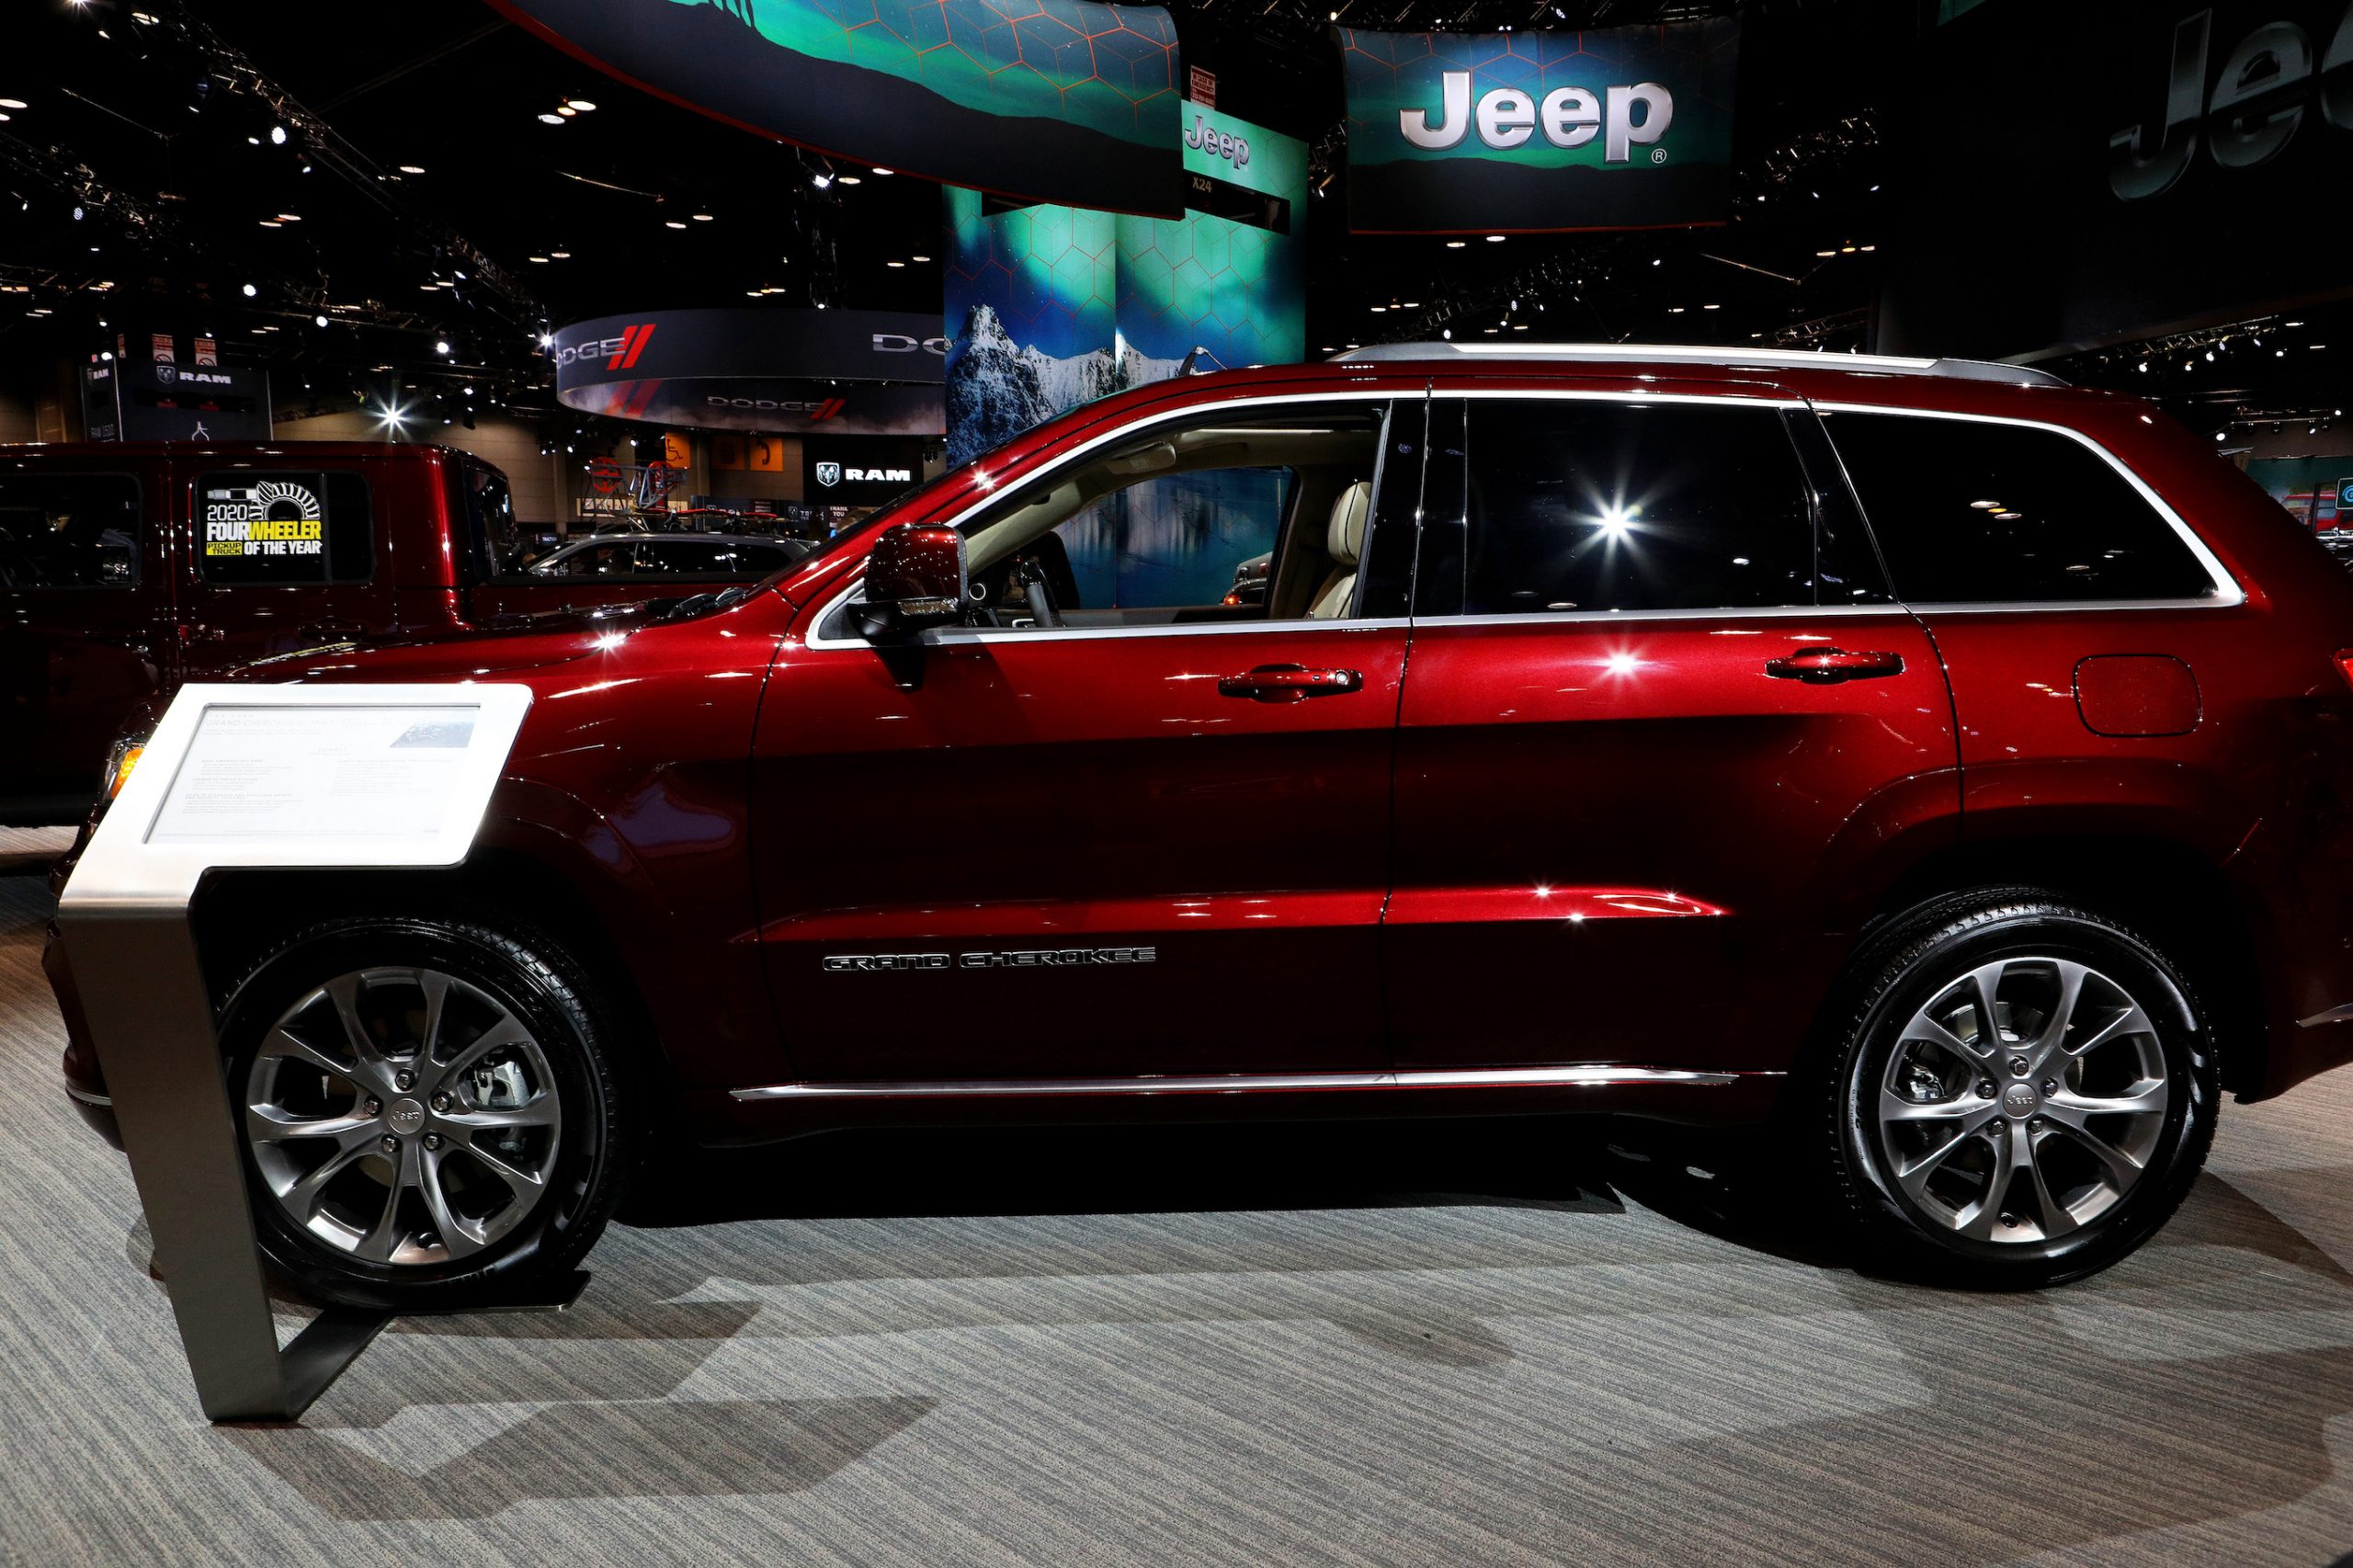 2020 Jeep Grand Cherokee Summit is on display at the 112th Annual Chicago Auto Show